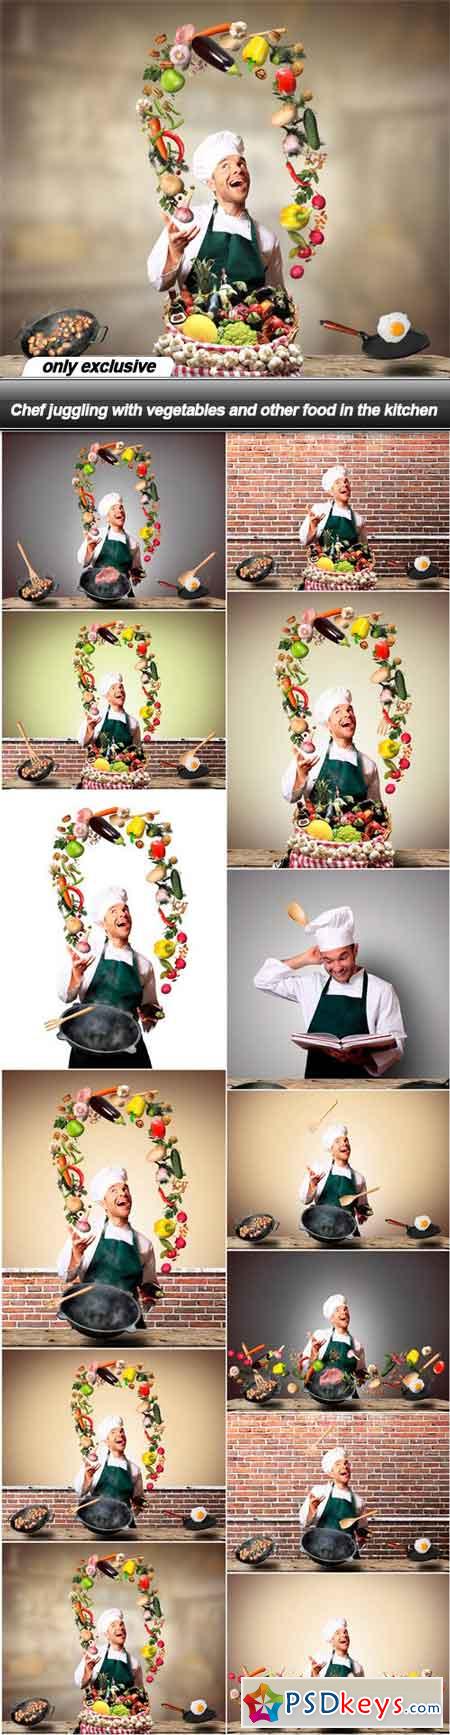 Chef juggling with vegetables and other food in the kitchen - 13 UHQ JPEG